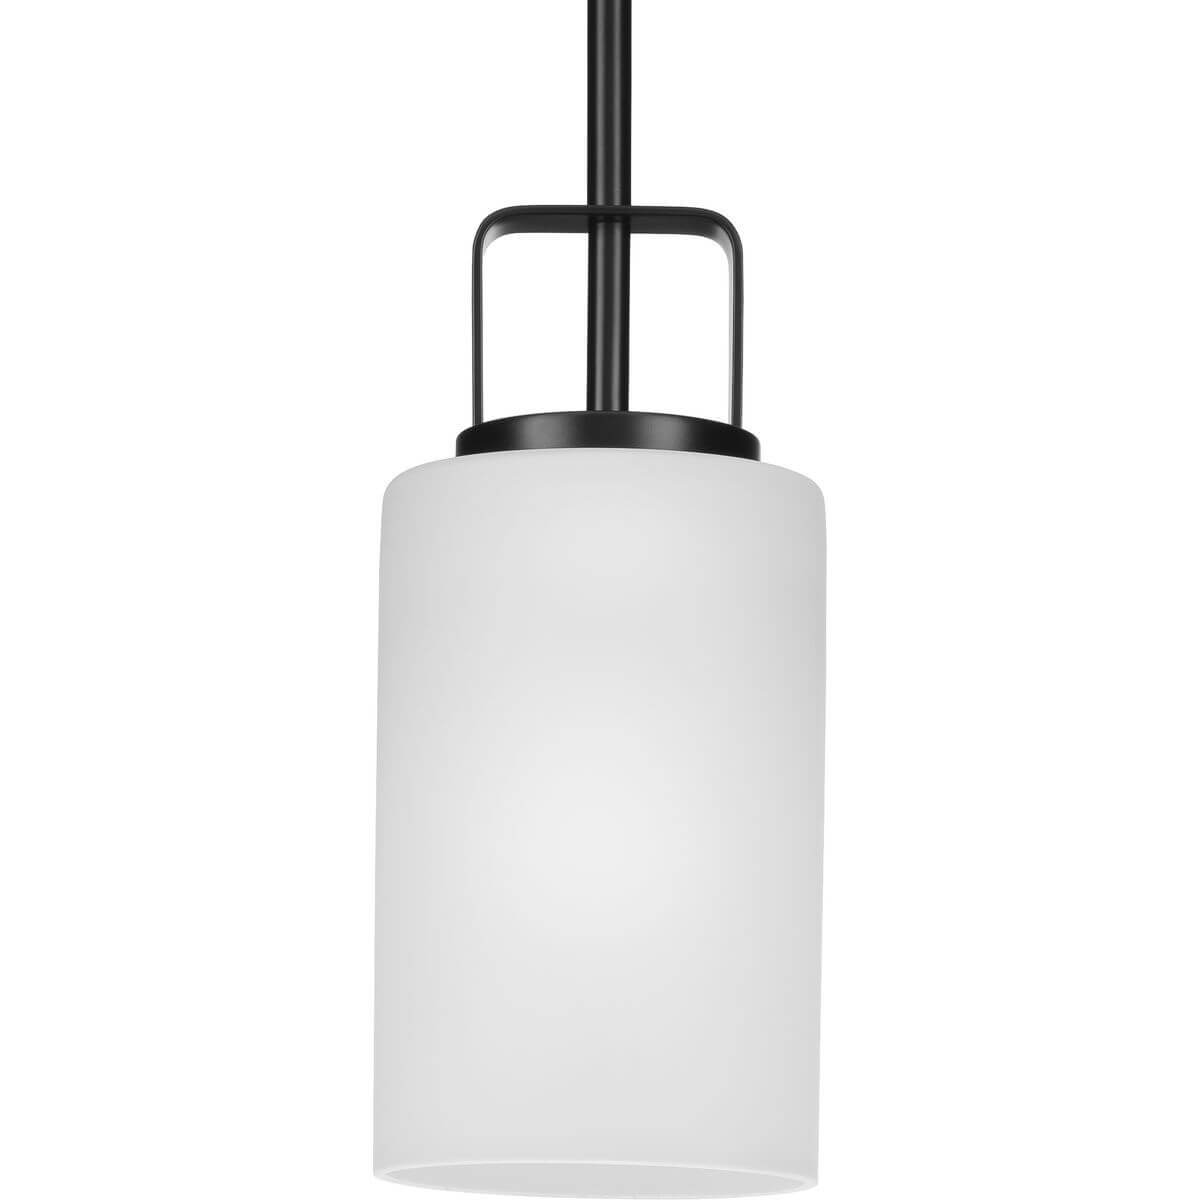 Progress Lighting League 1 Light 5 inch Mini Pendant in Matte Black with Etched Glass P500341-31M